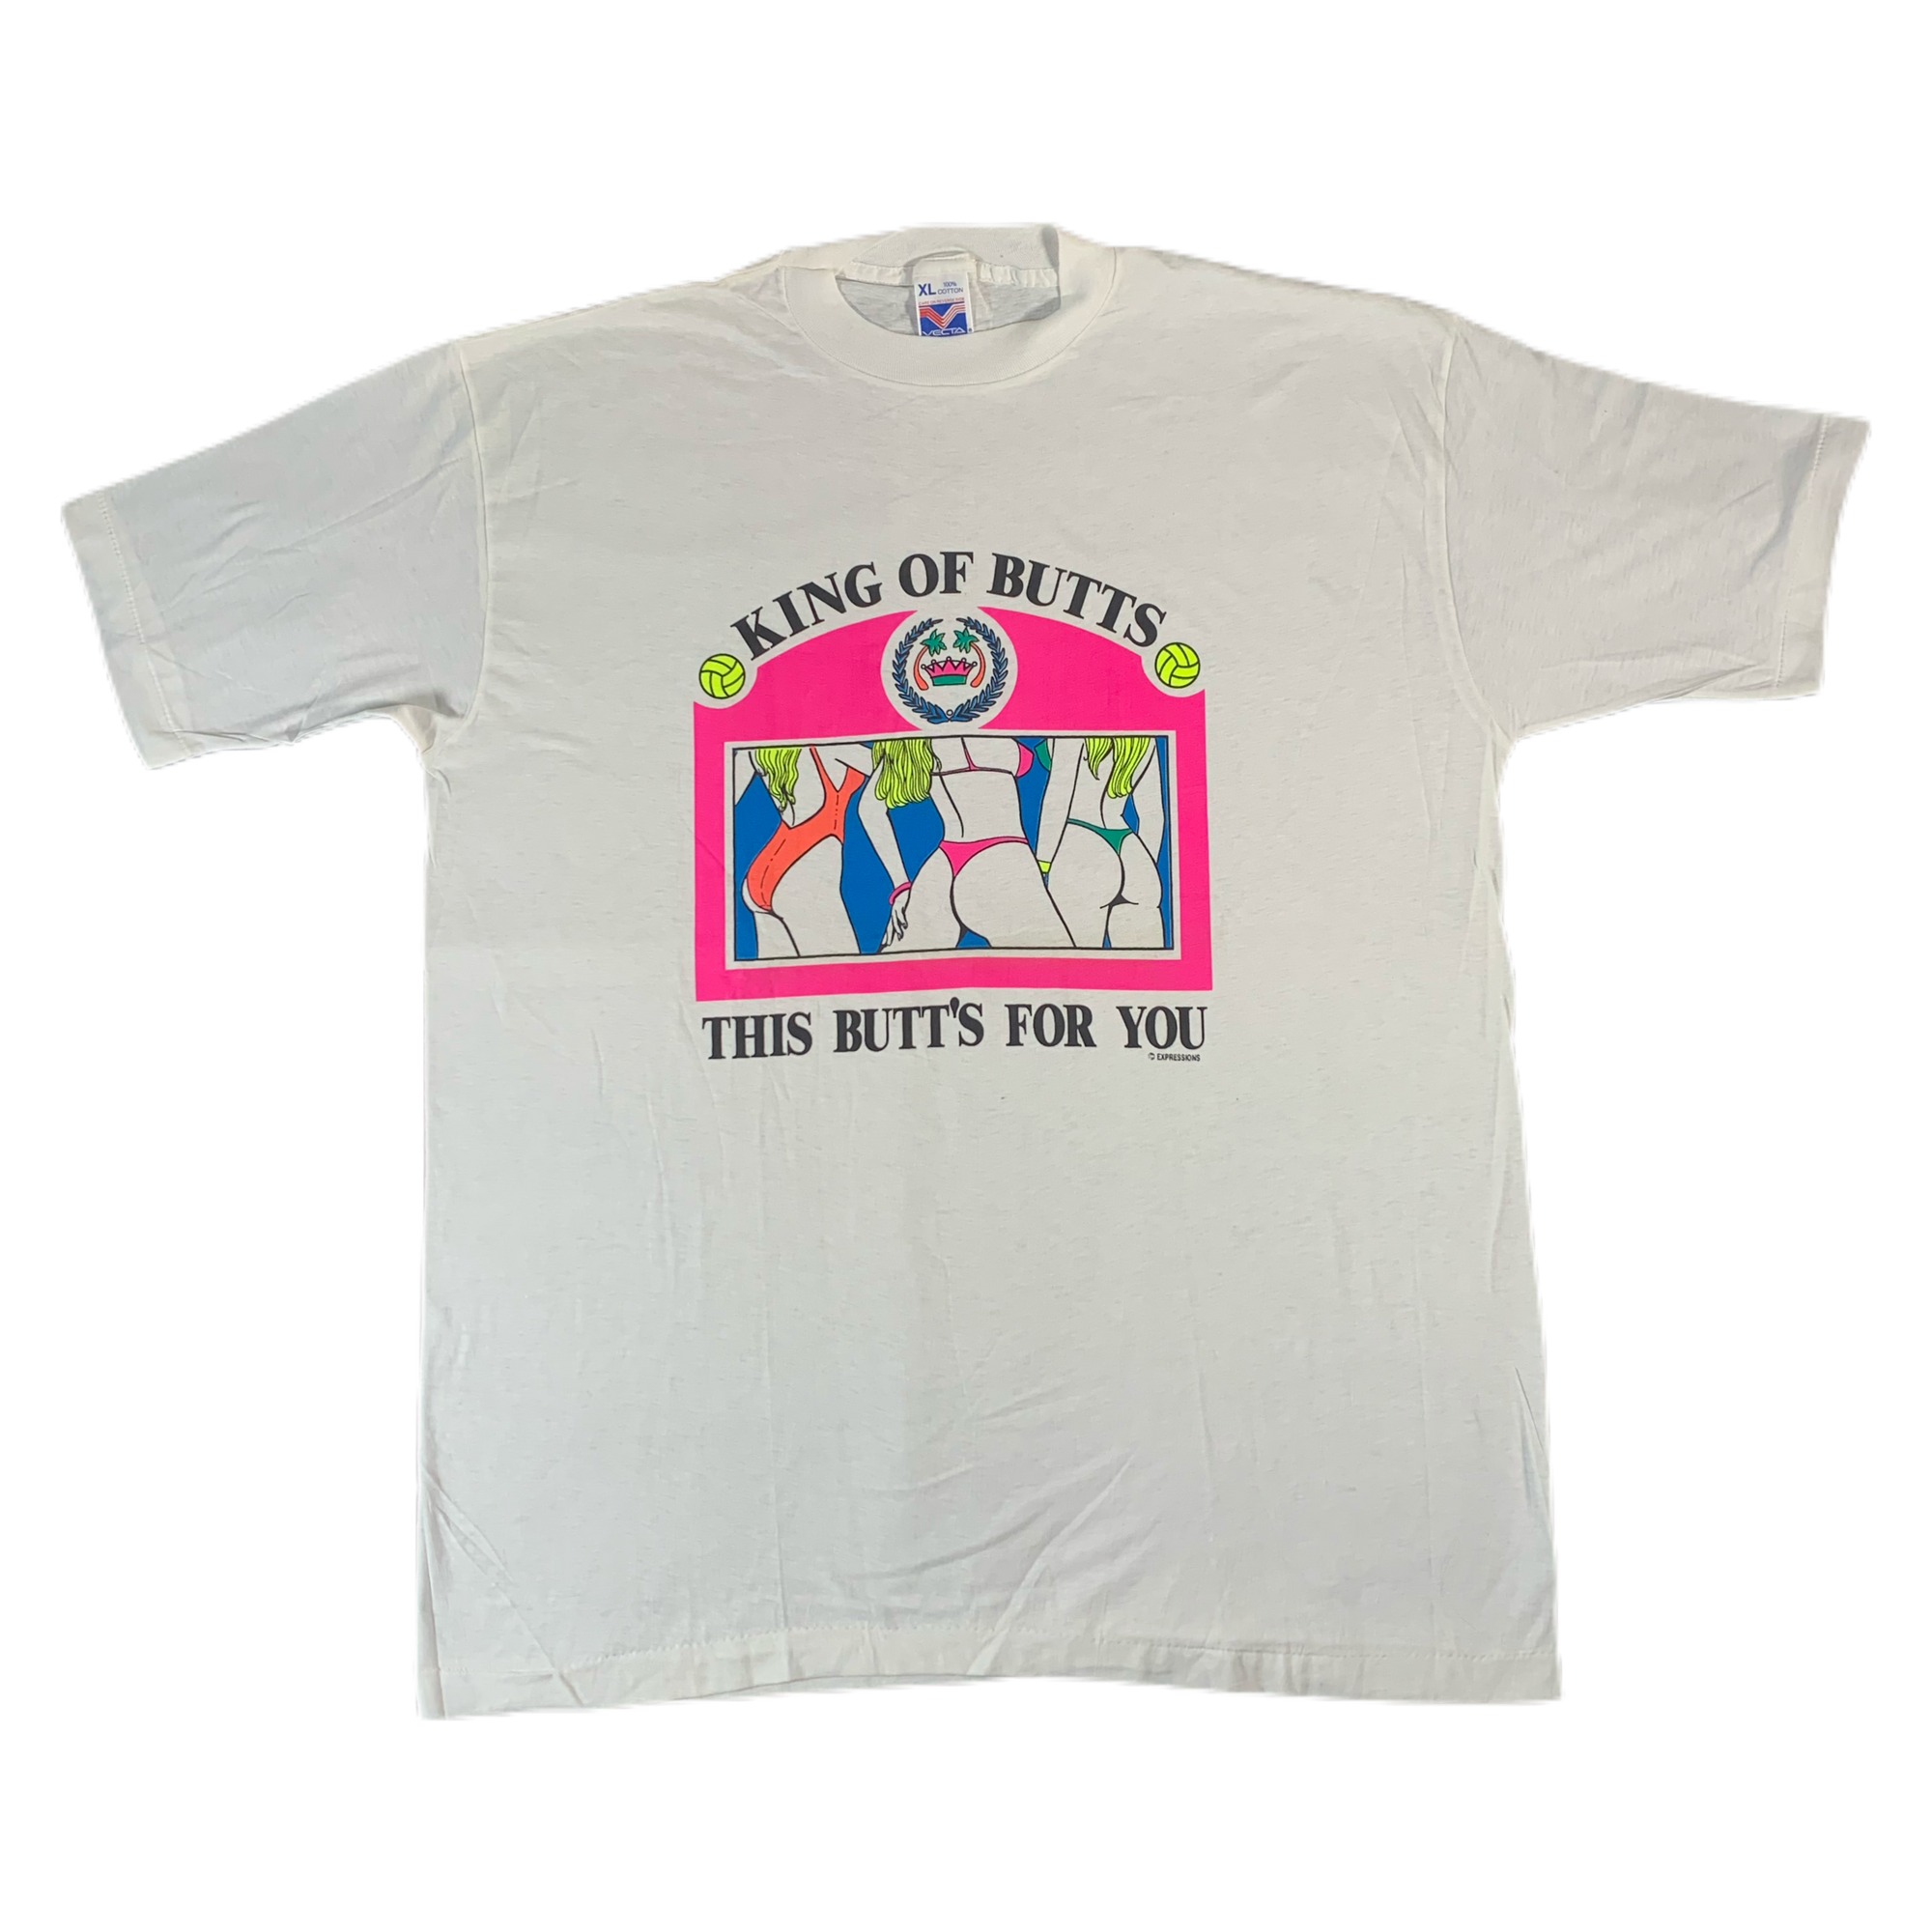 Vintage Volleyball “King Of Butts” T-Shirt - jointcustodydc